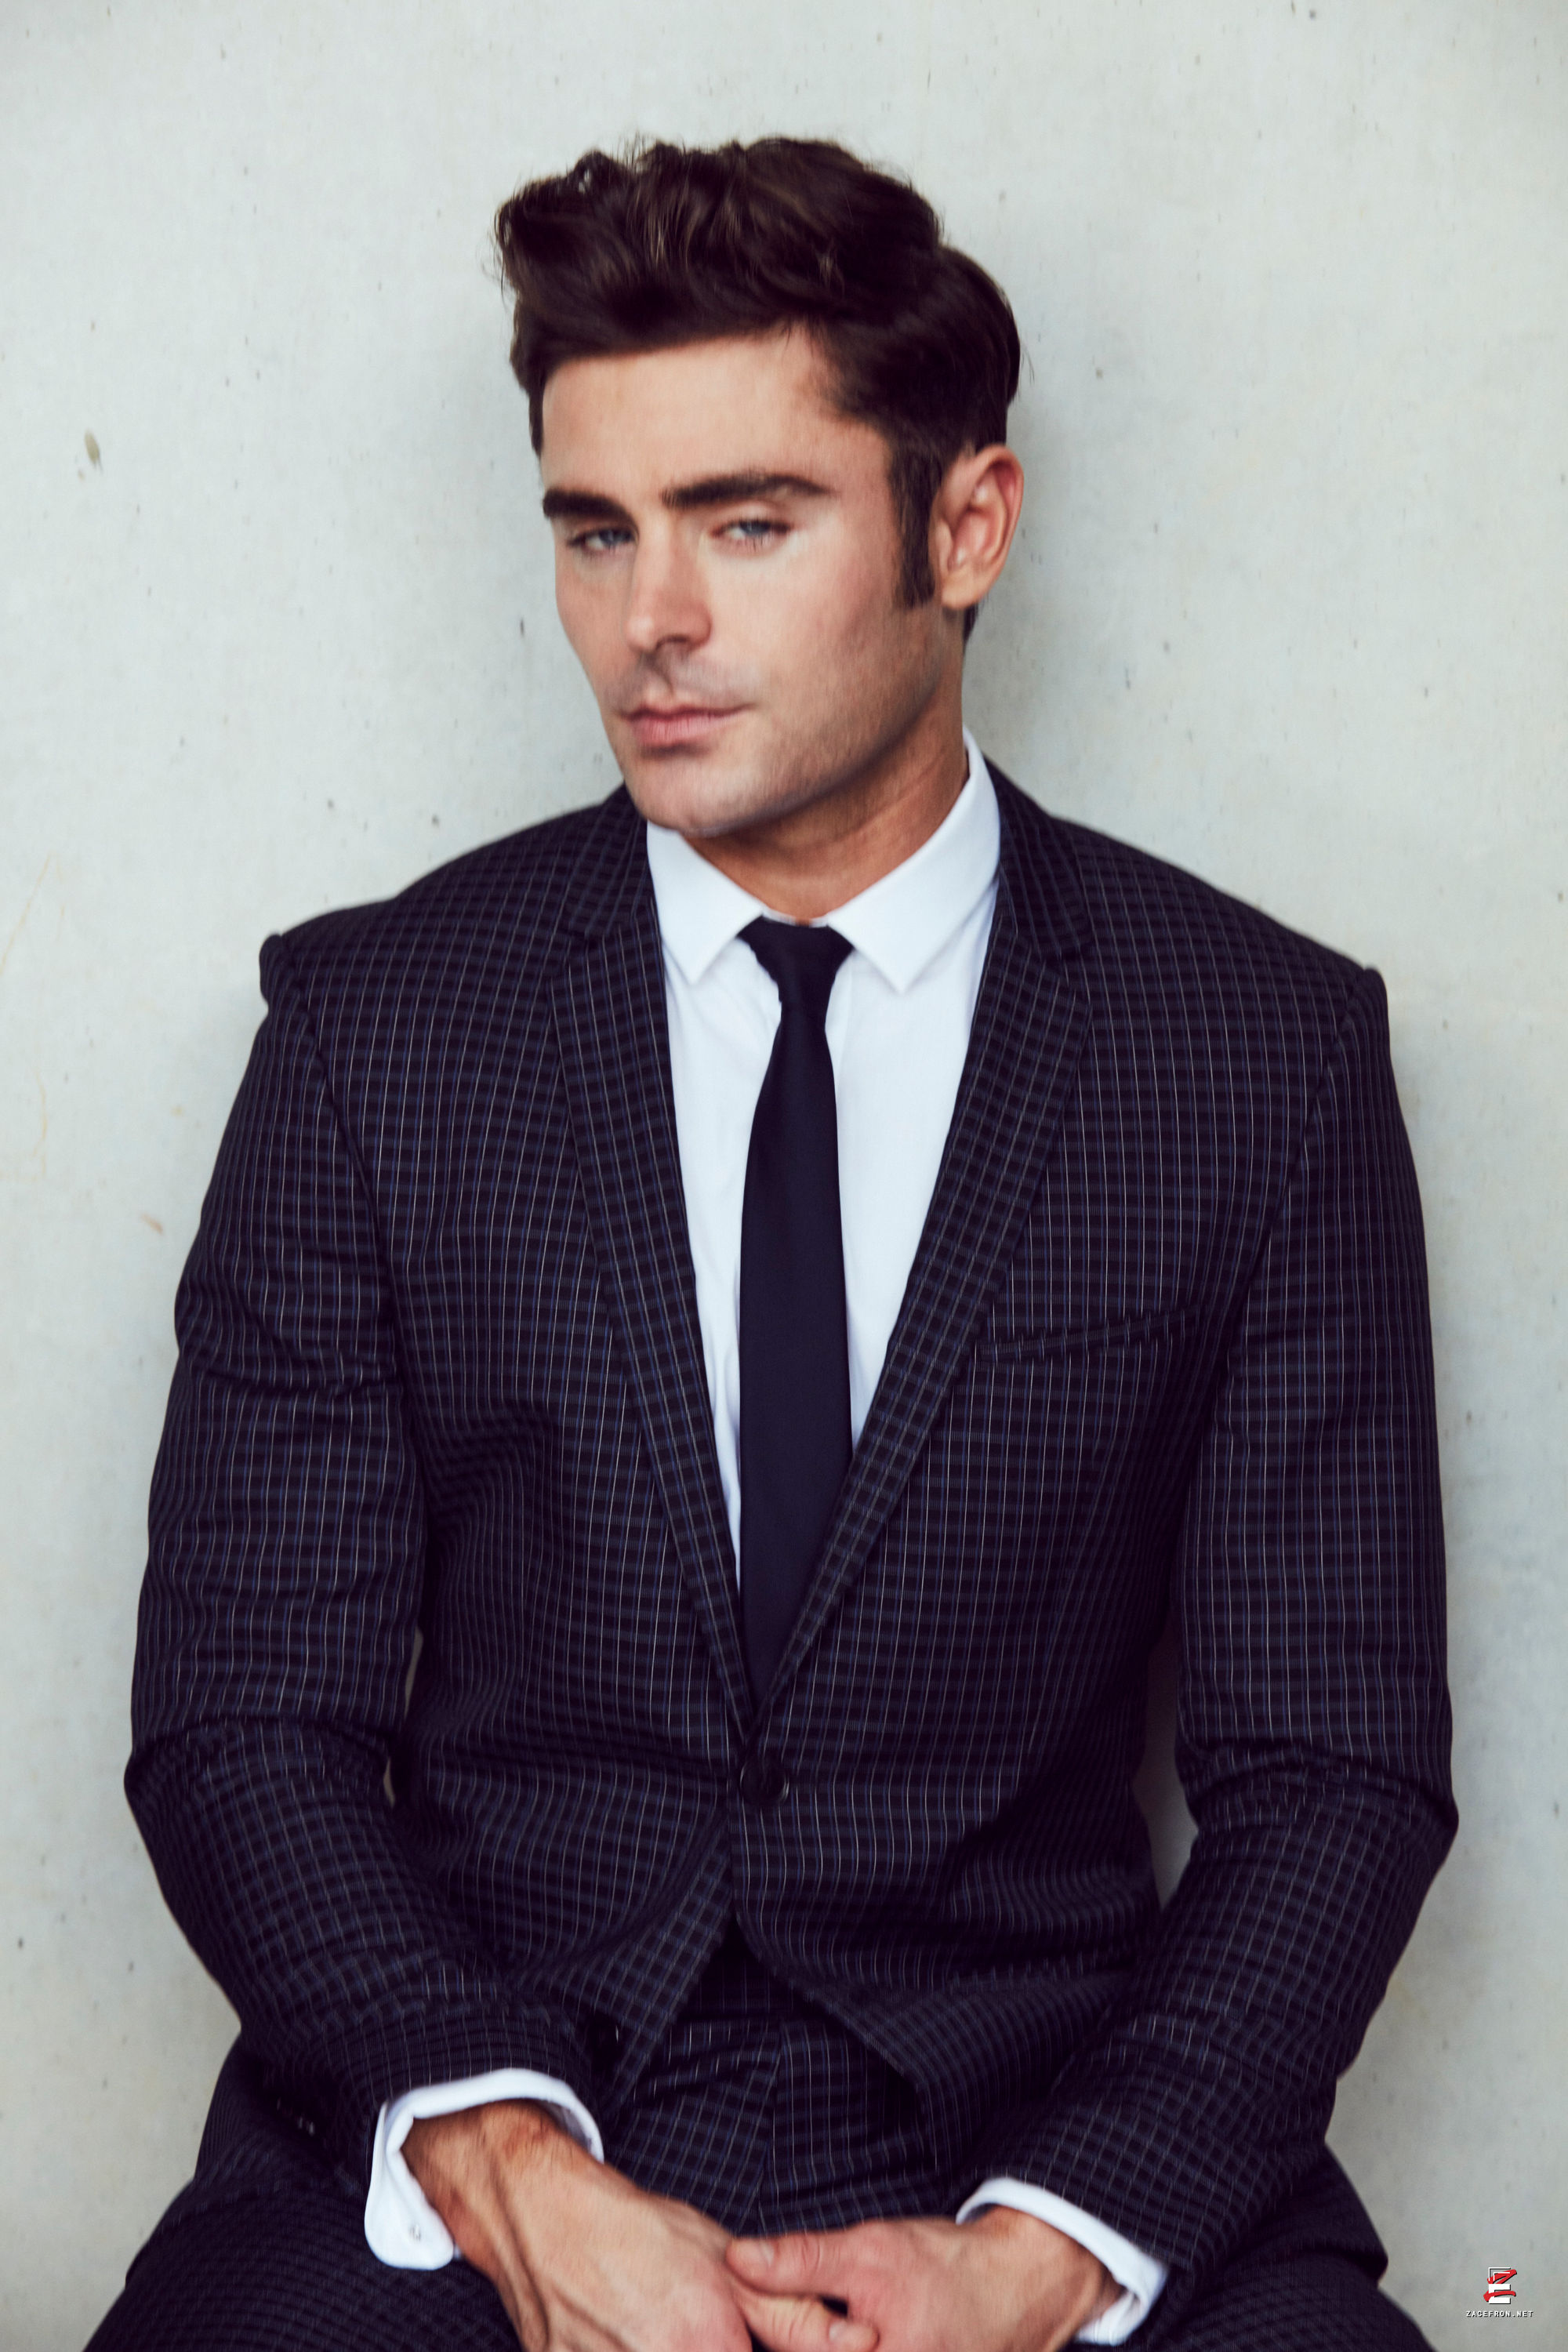 Session 02 | GQ Mexico - 0184 - Efron Experience - Photo Gallery